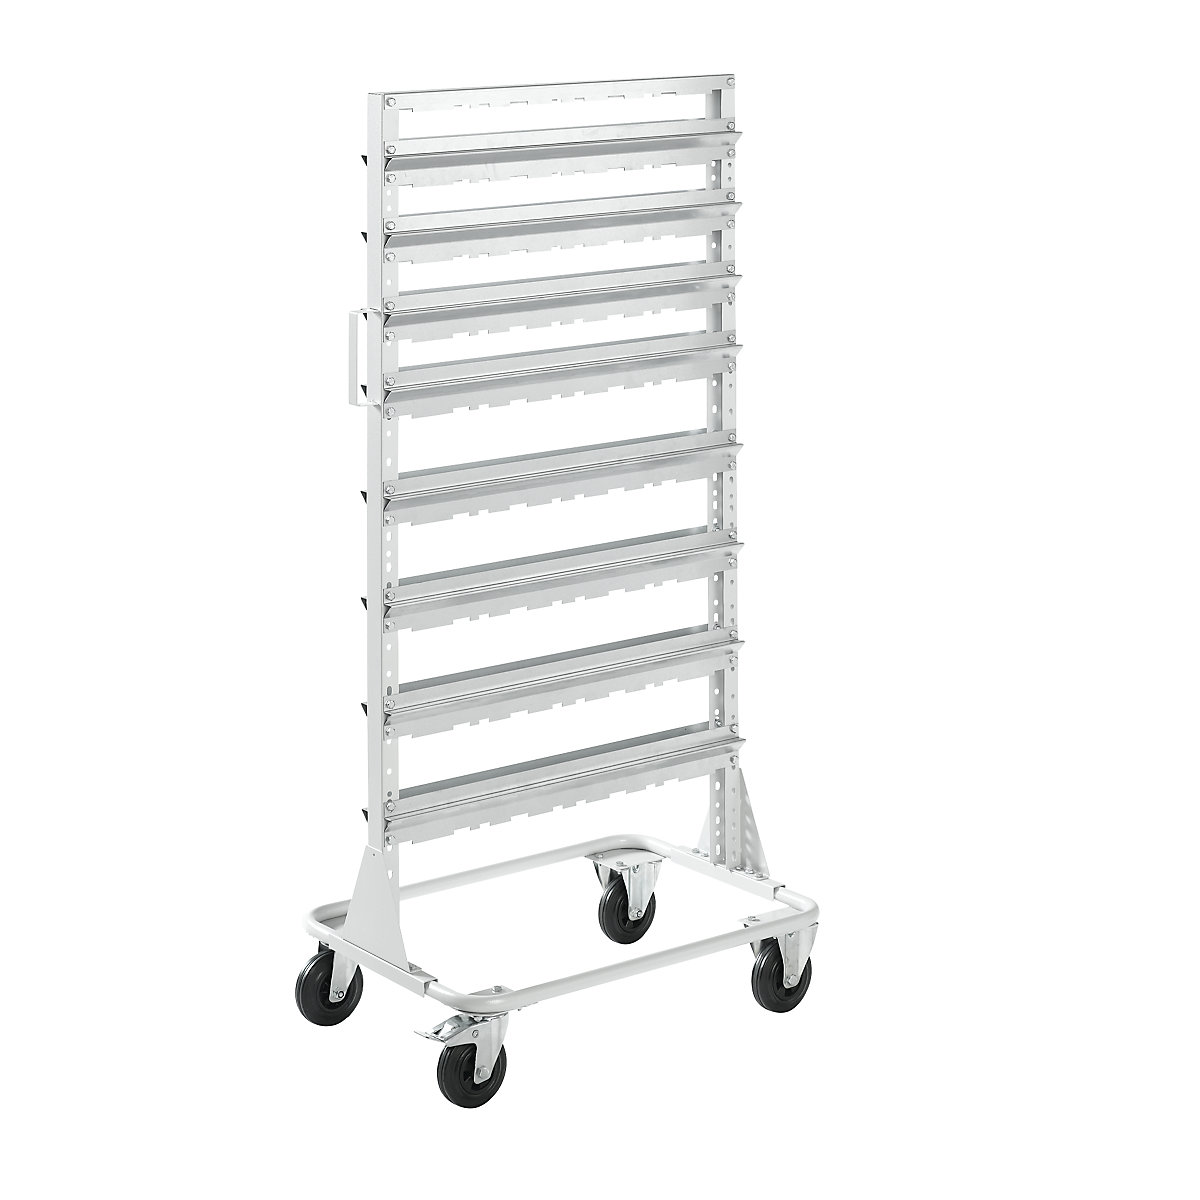 Mobile rack, height 1588 mm, mobile rack for 80 open fronted storage bins, light grey-3